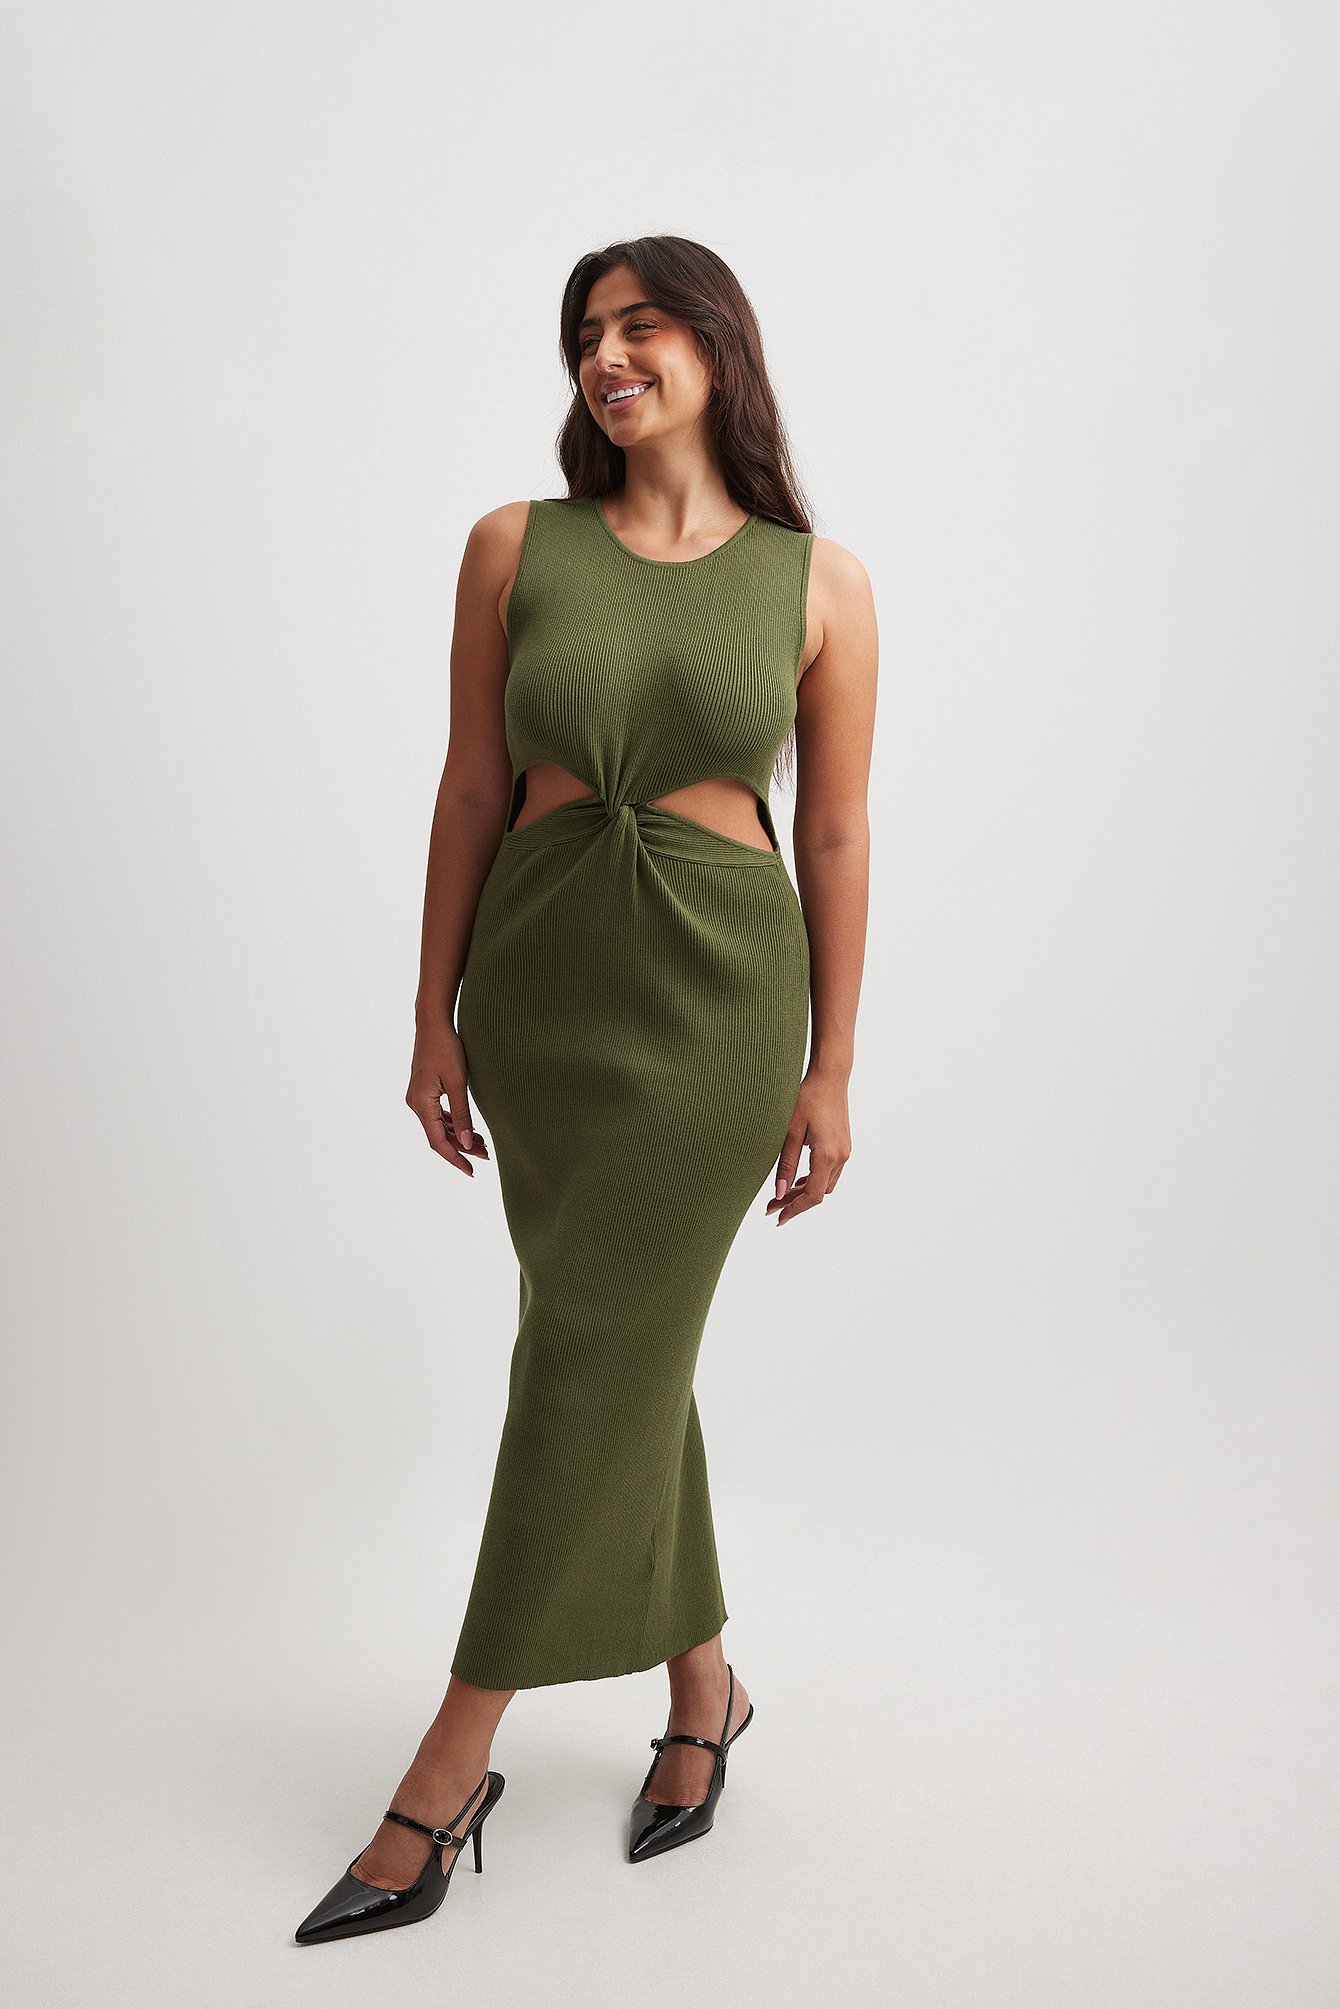 Formal Bodycon Dresses | Abyss By Abby